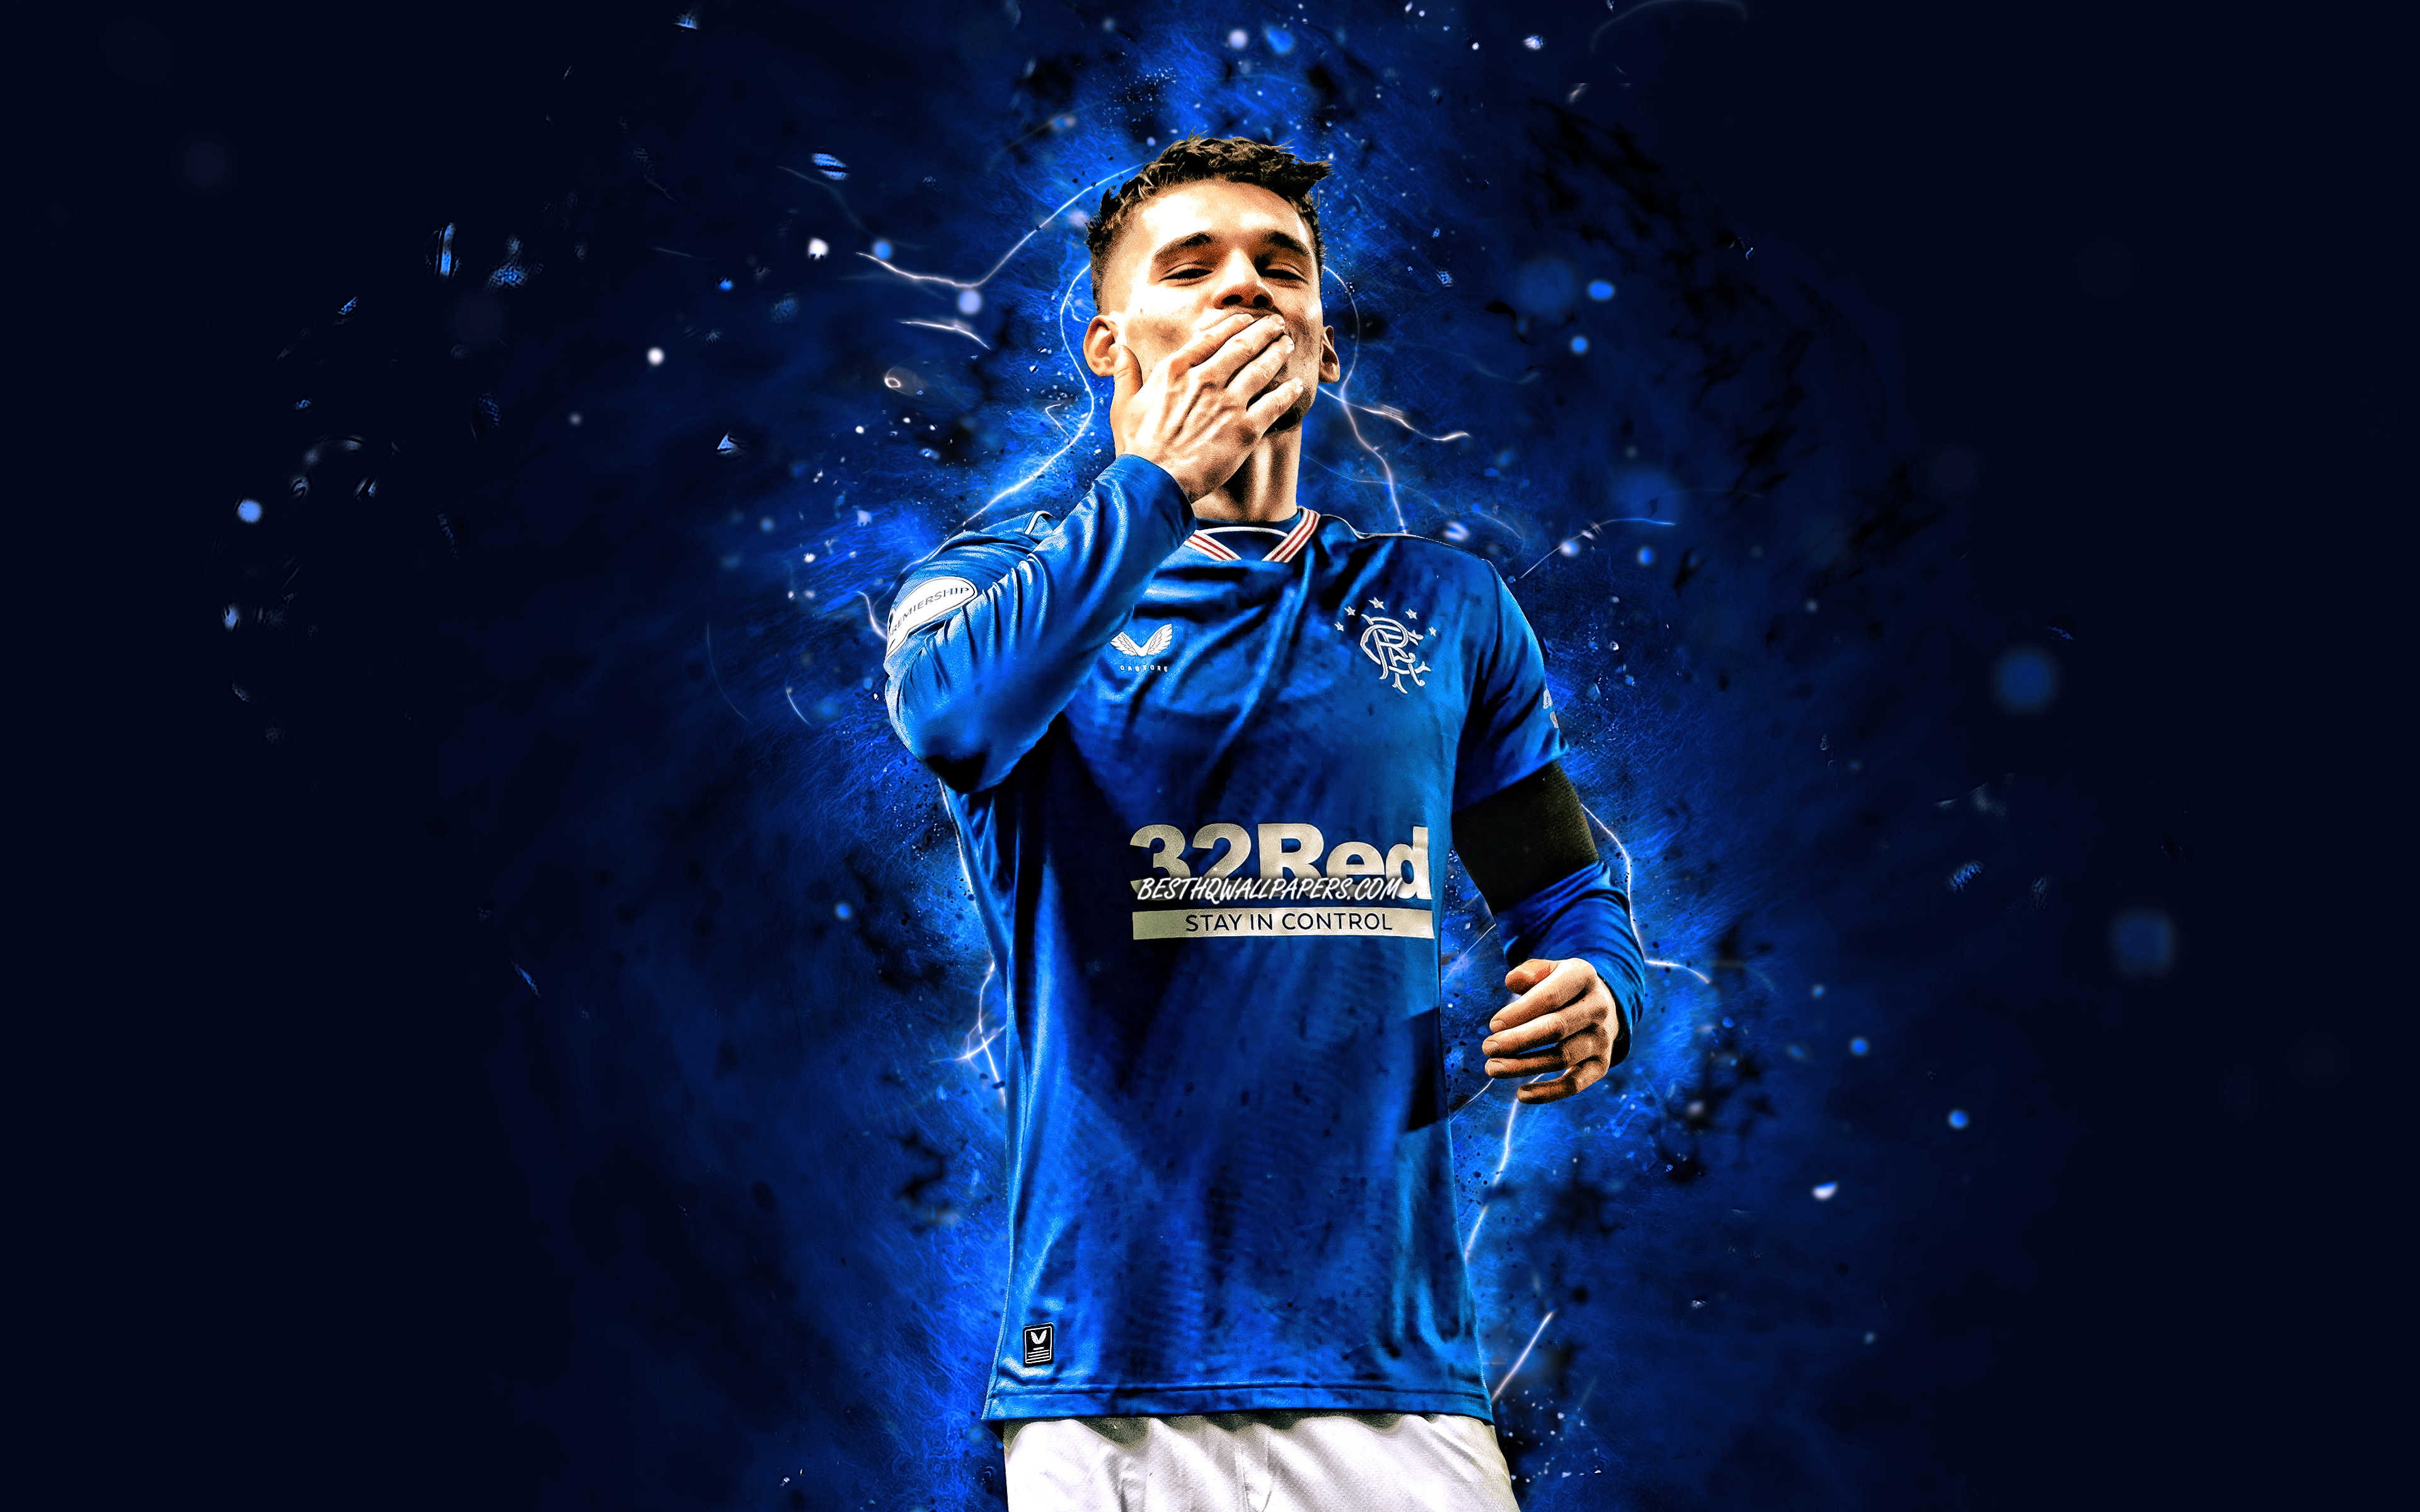 Download wallpapers Ianis Hagi, 4k, blue neon lights, Rangers FC, romanian footballers, soccer, Ianis Hagi 4K, Ianis Hagi Rangers for desktop with resolution 3840x2400. High Quality HD pictures wallpapers